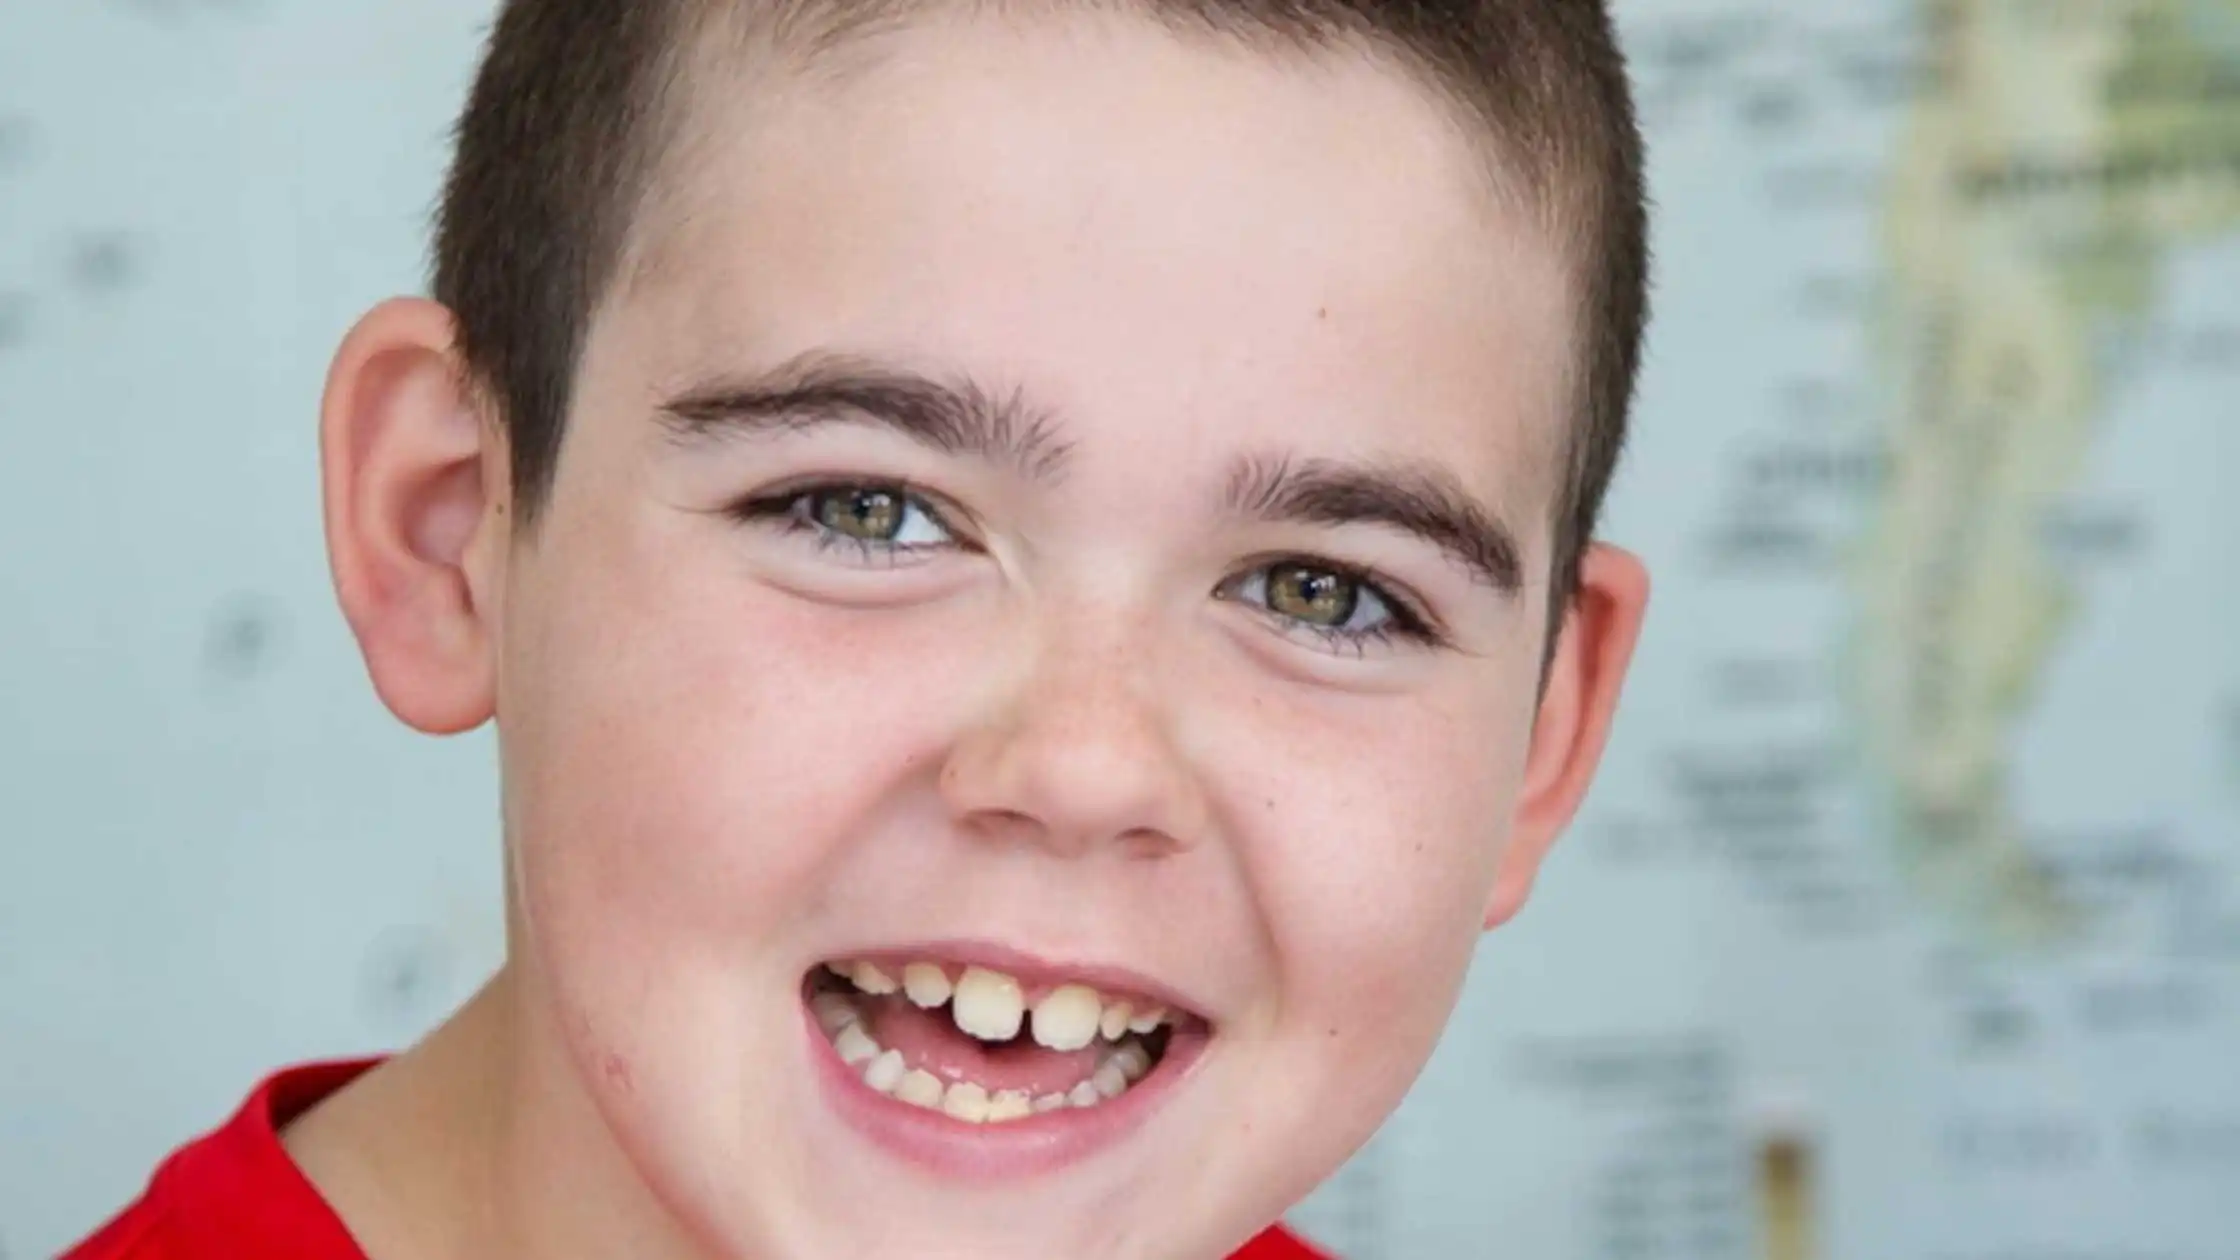 Alfie Dingley Elatedly Shares His Two Years Seizure free Experience with Medical Cannabis